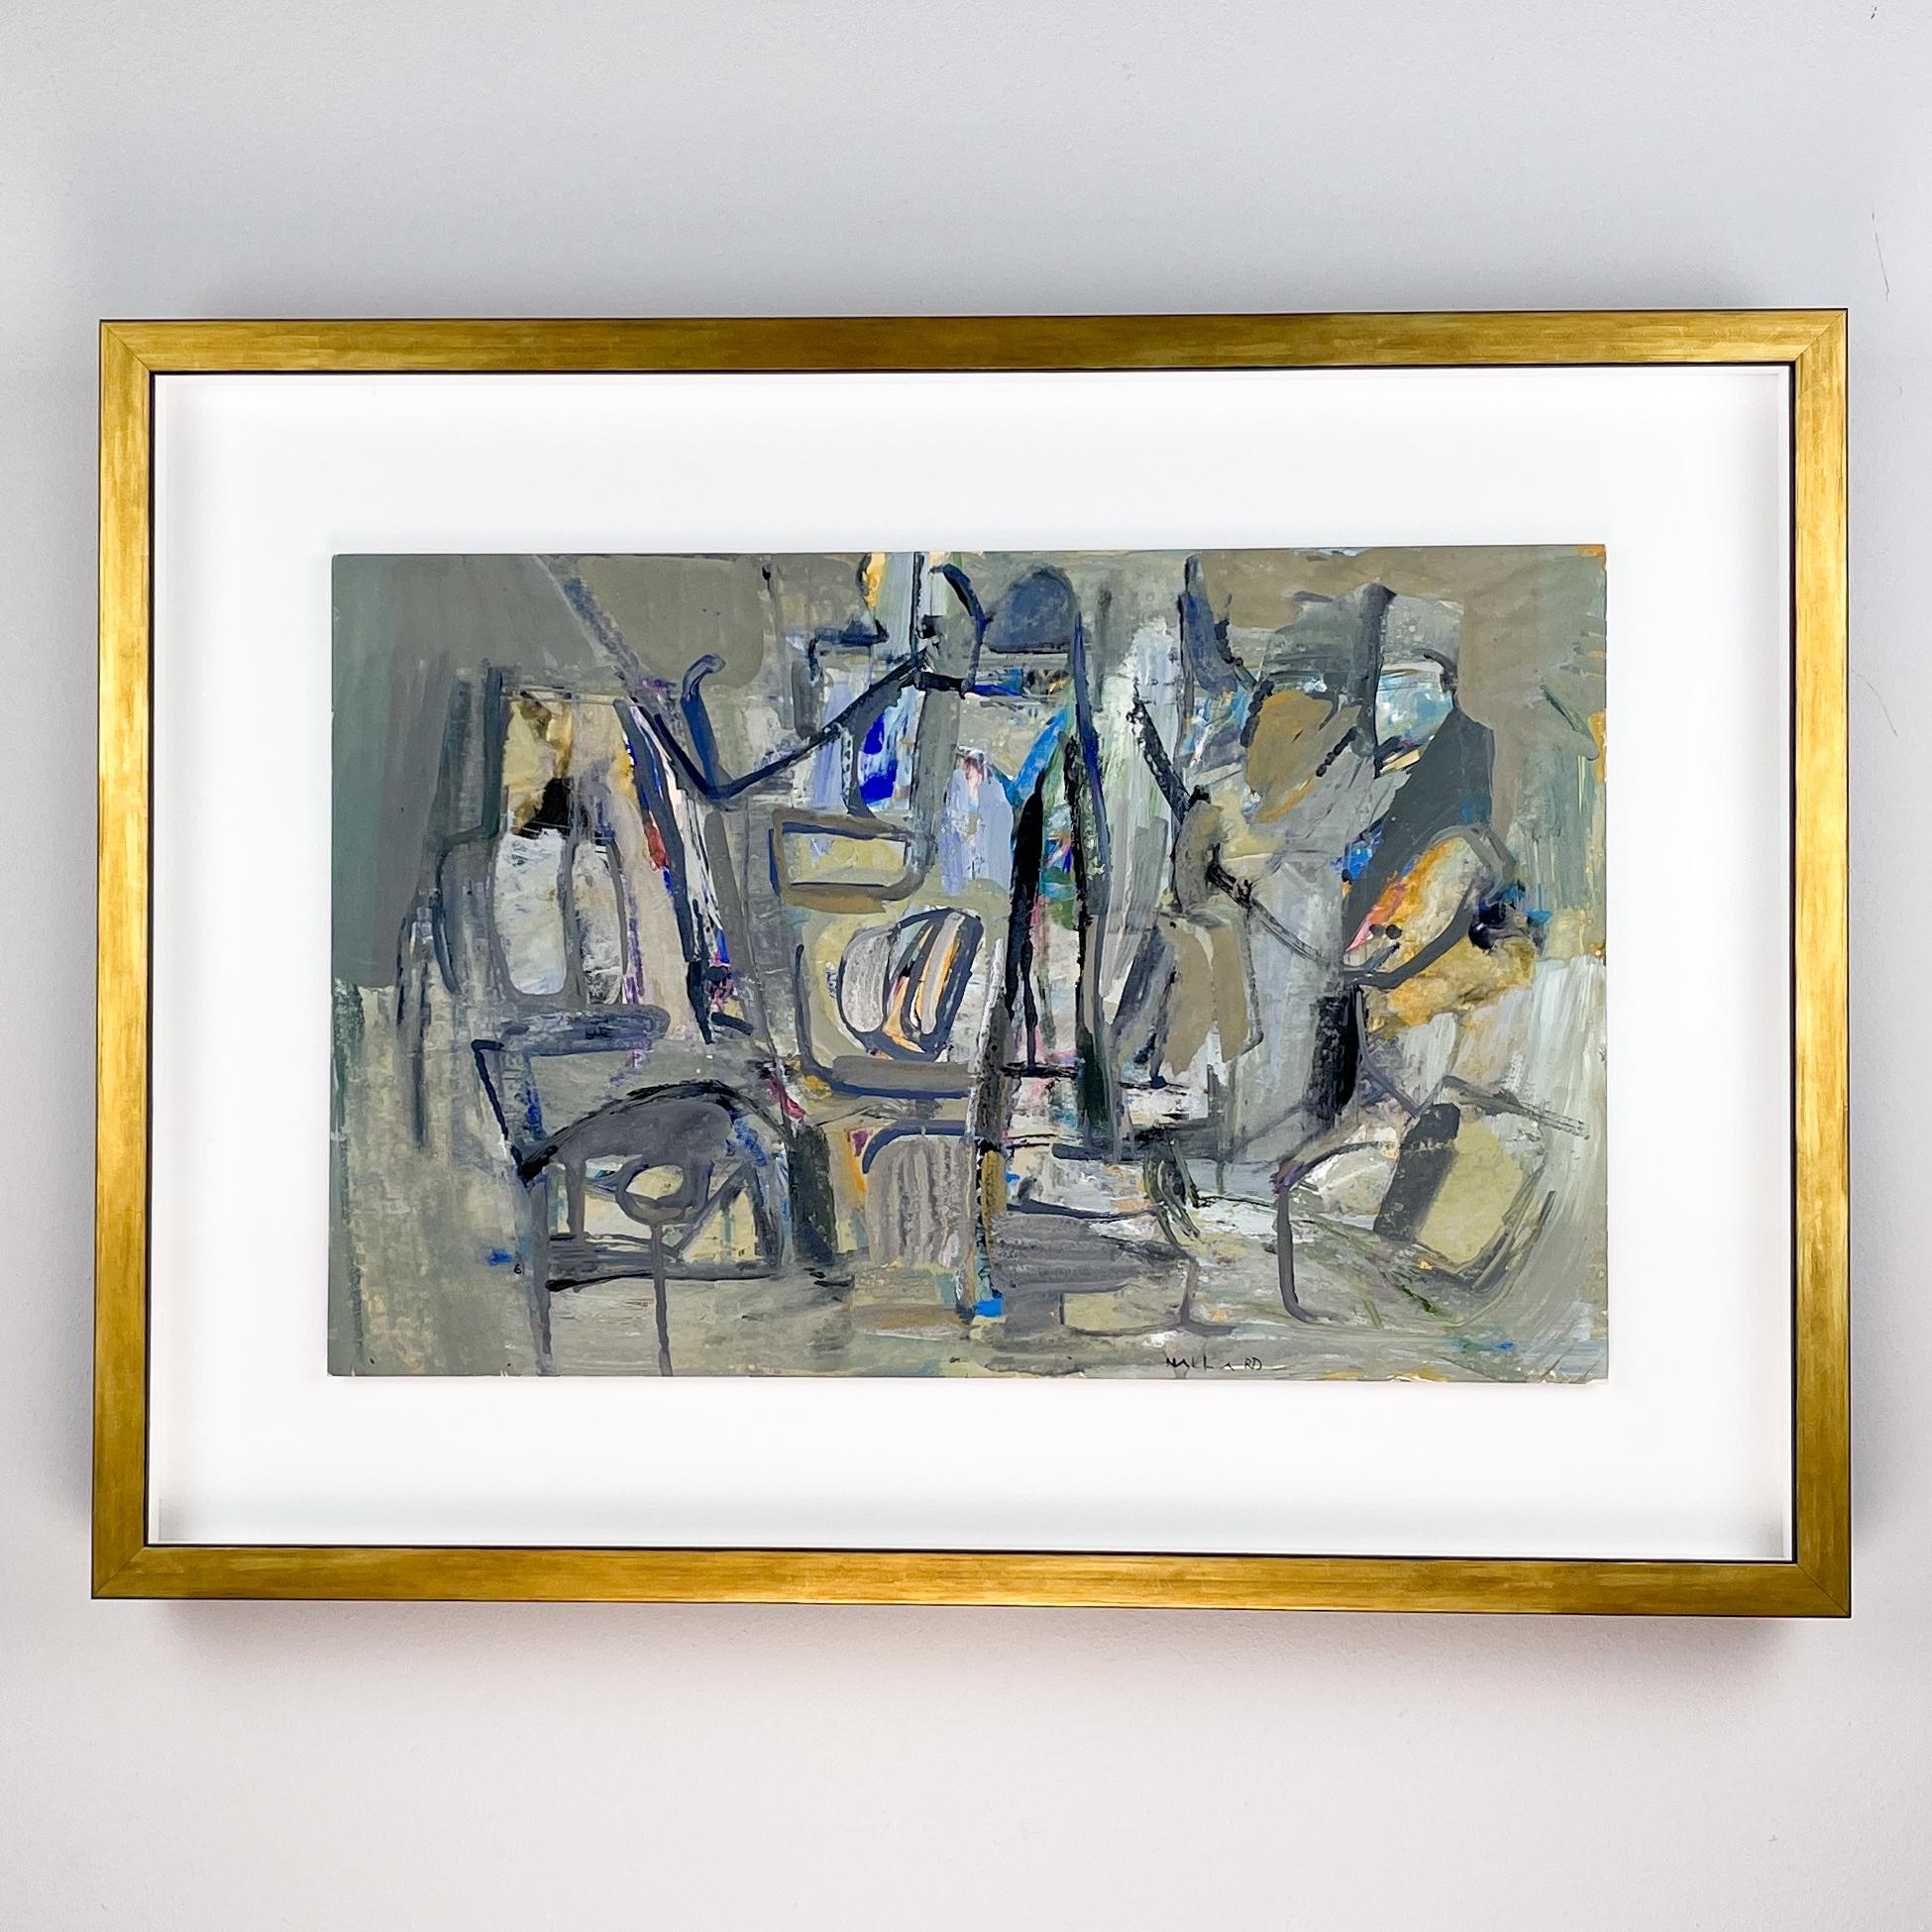 Louis Nallard, “Interior”, circa 1955 – Tempera on cardboard, professionally framed

Original artwork by French painter Louis Nallard. In this abstracted Interior the artist blends grey and earthtones with strokes of vibrant blues, orange and green.